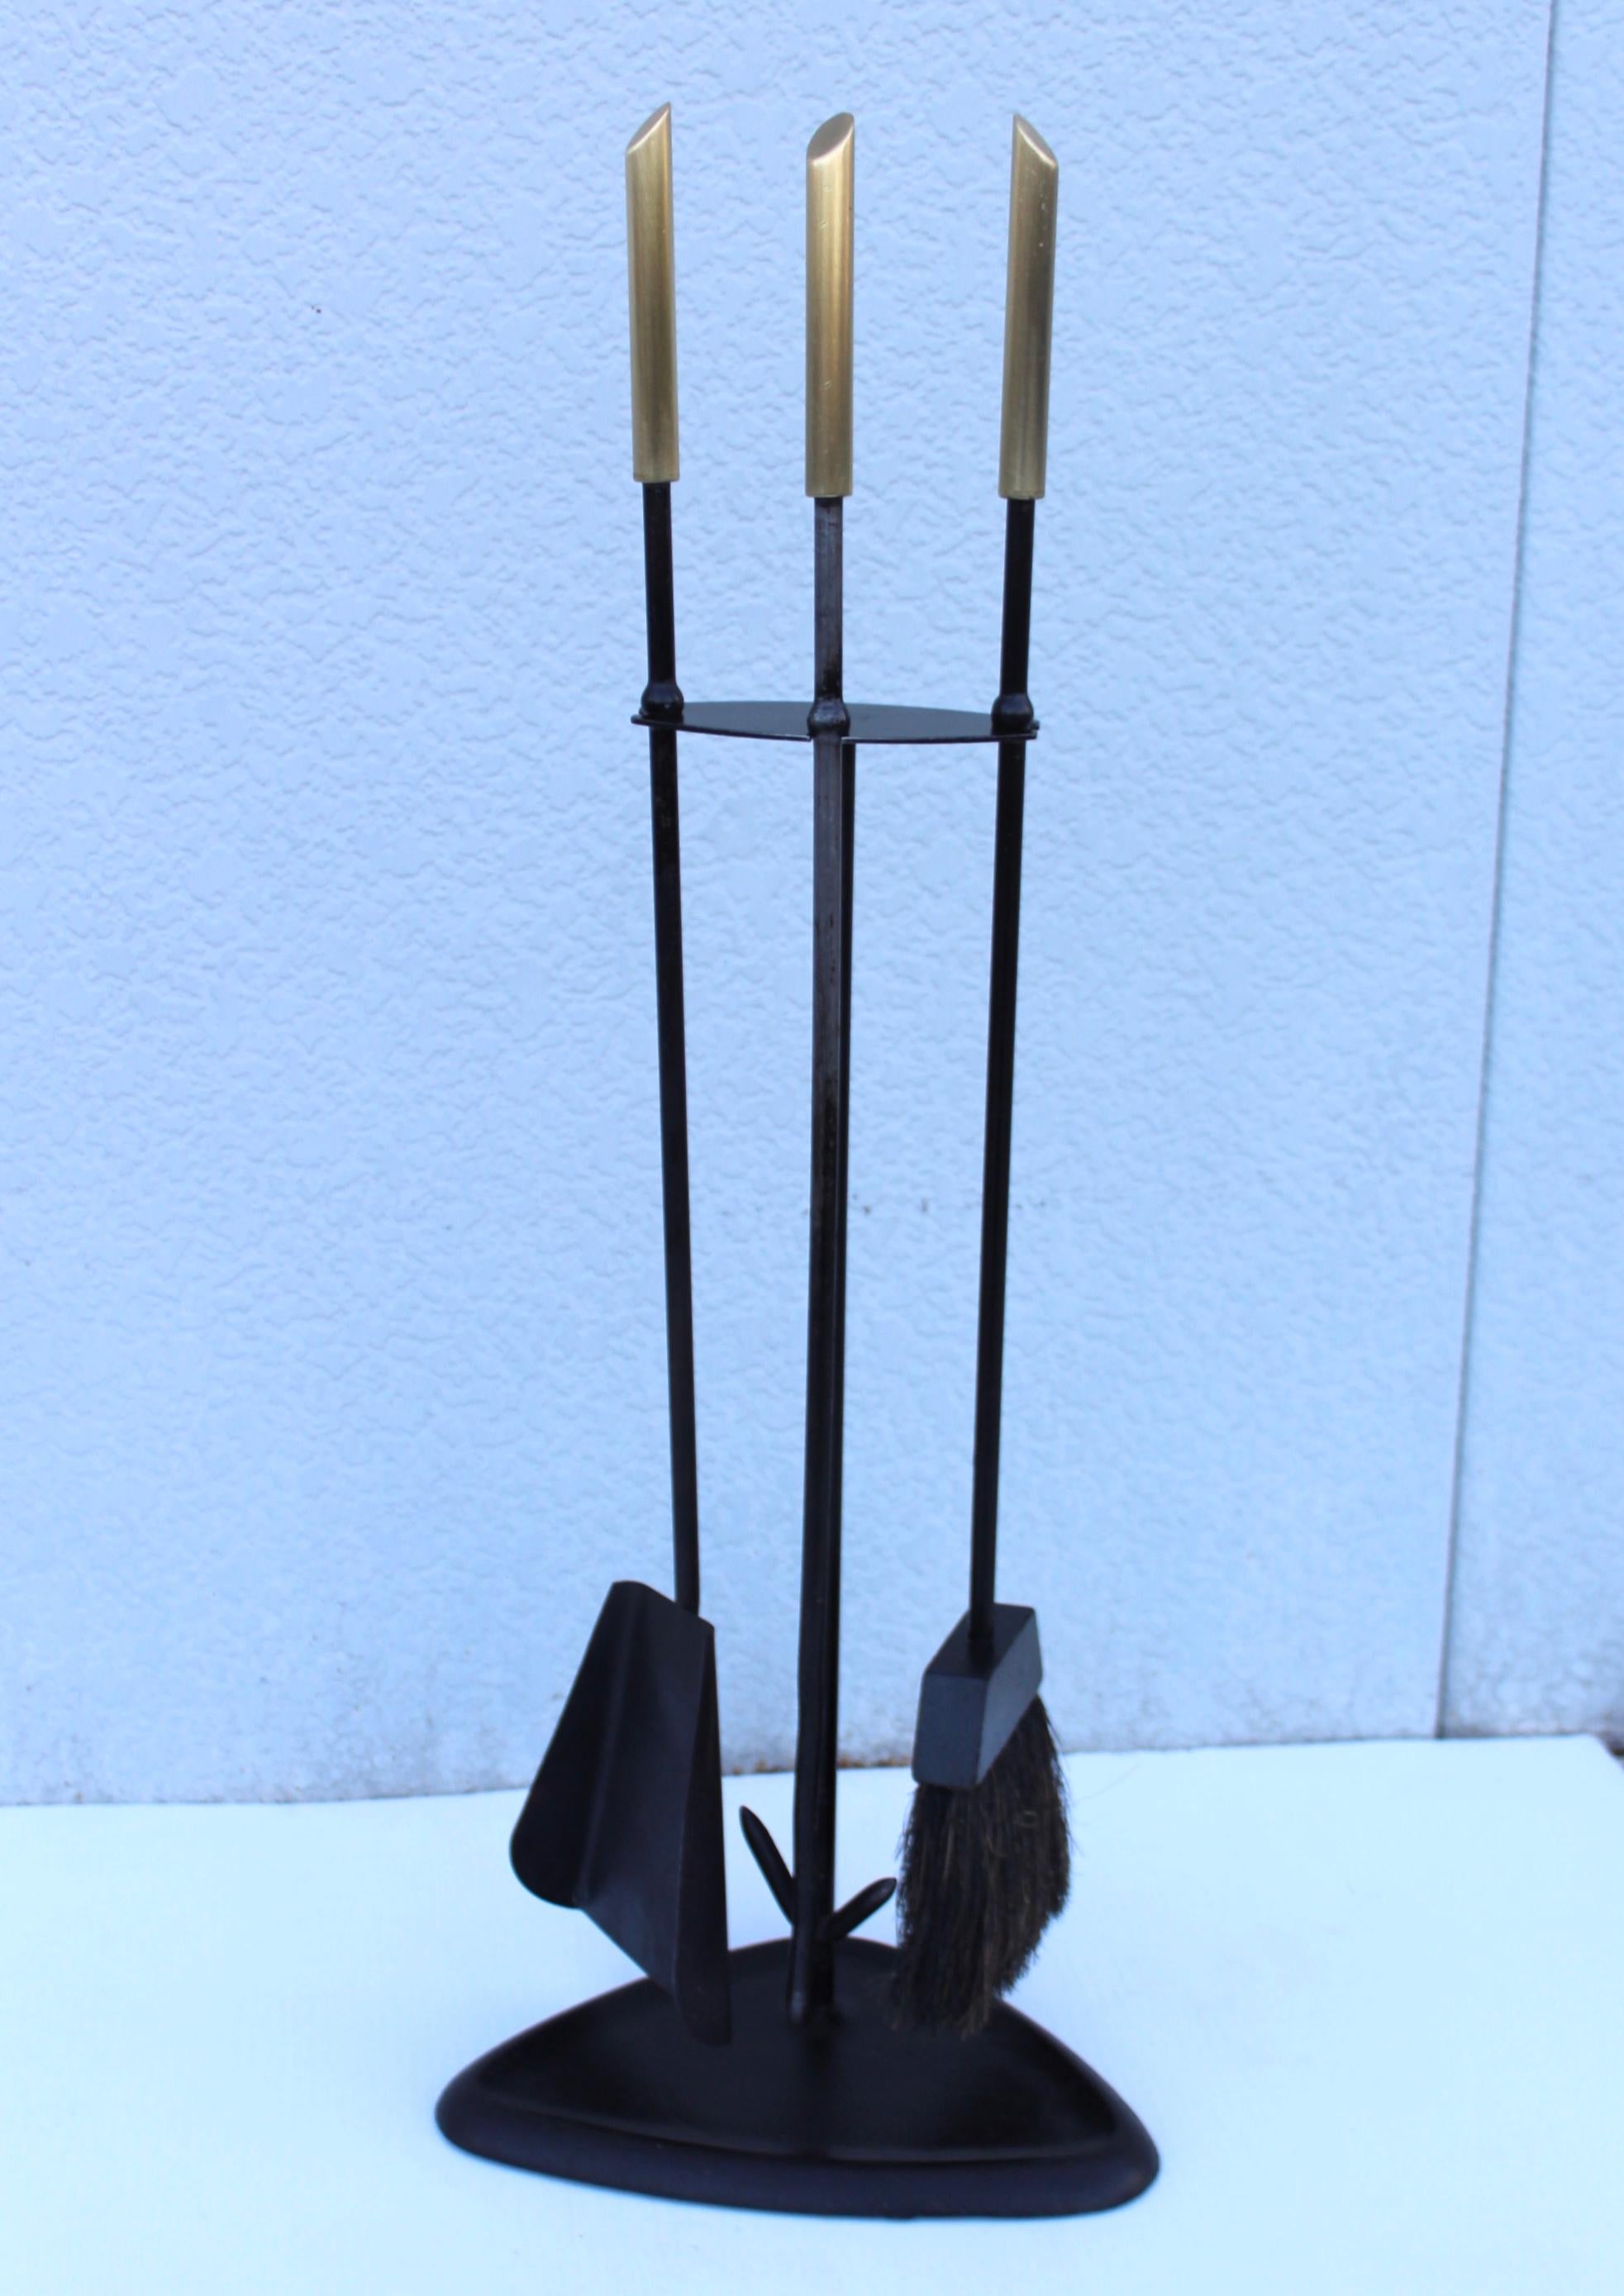 1960s modernist brass and iron fireplace tools, in vintage original condition with some wear and patina due to age and use.